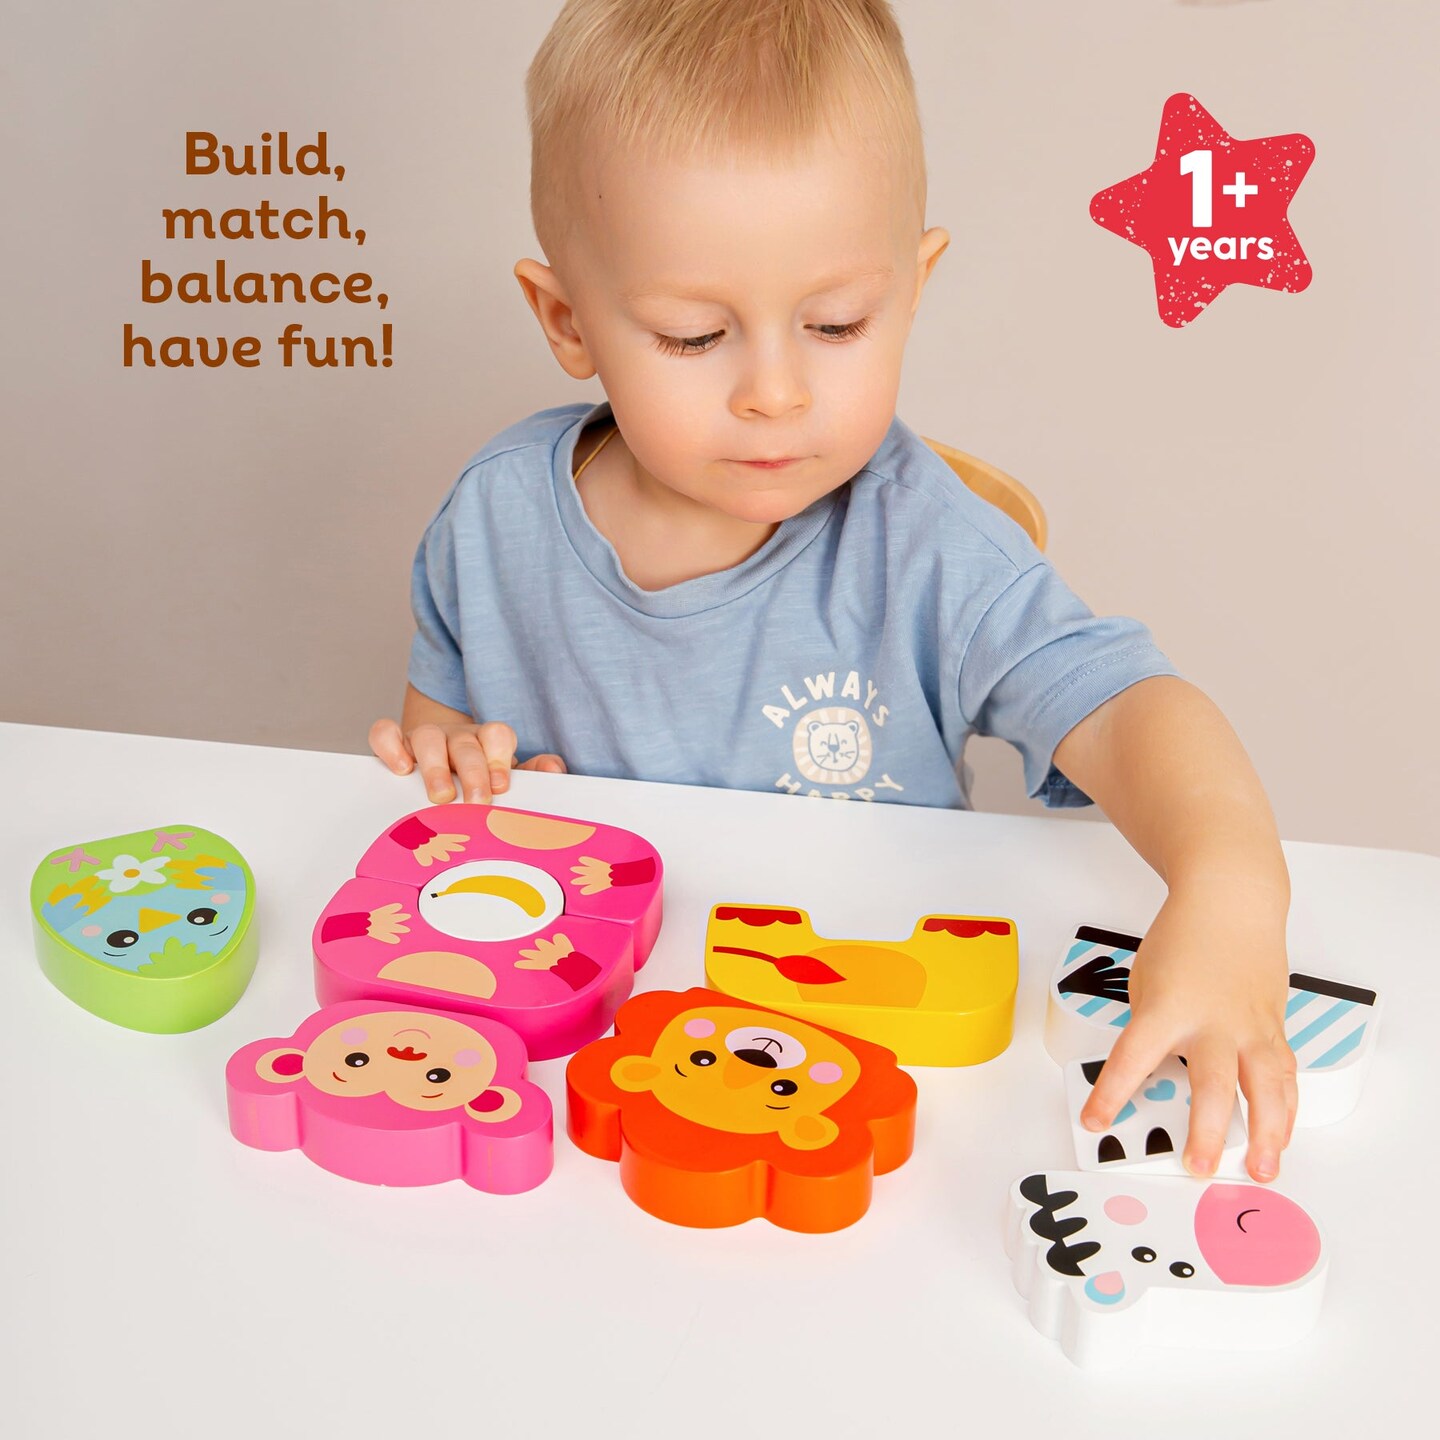 Kids Hits: Build Your Own Adventure with the Wooden Blocks Friendly Zoo!